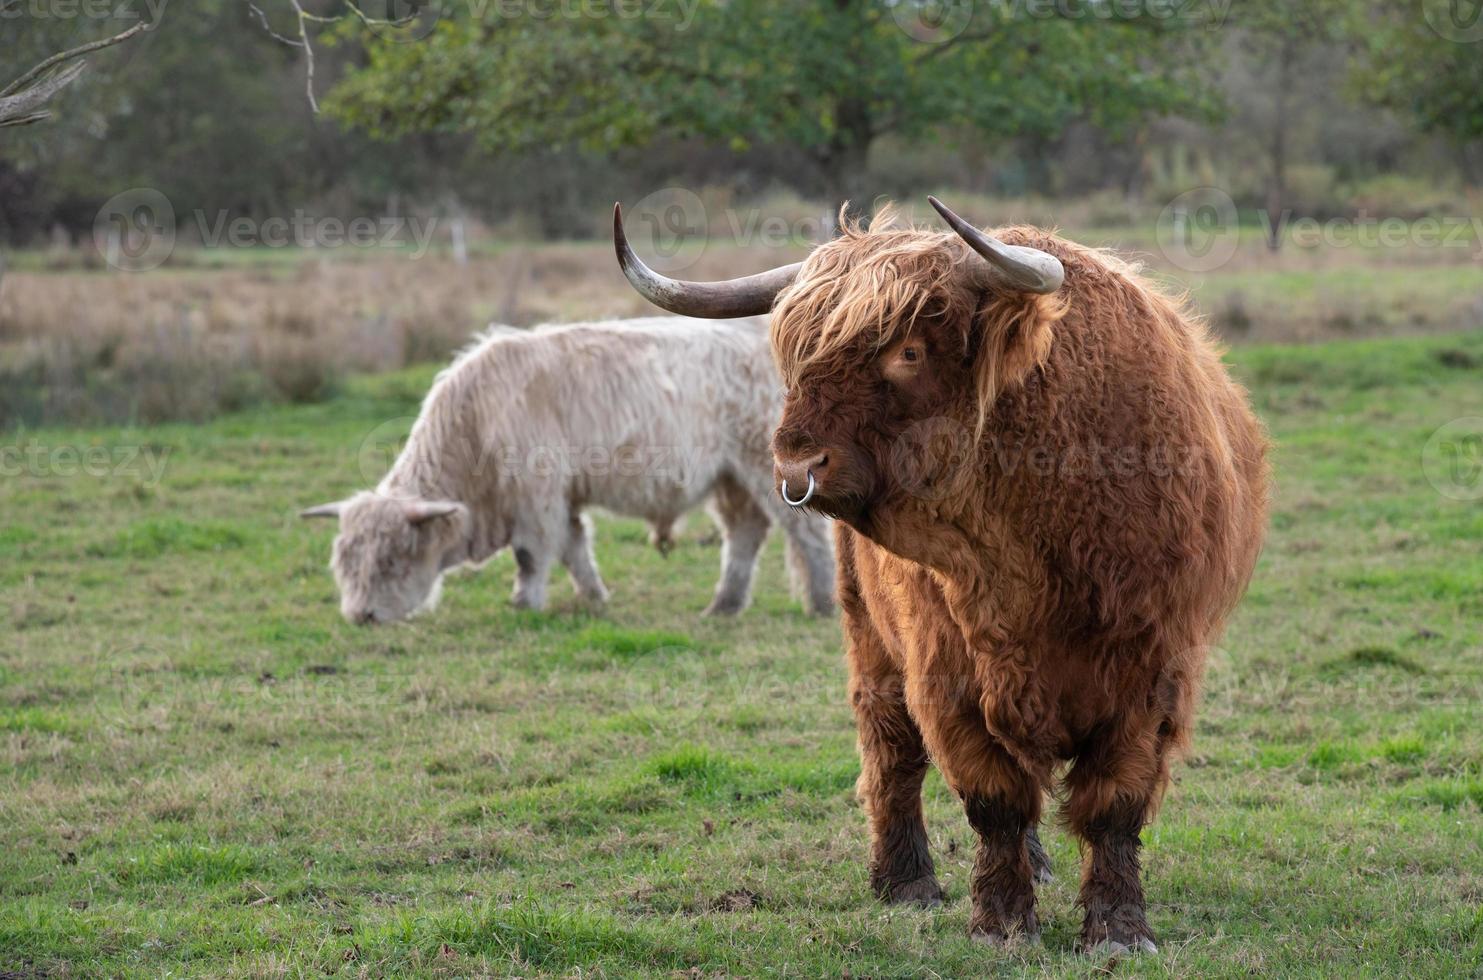 a brown Galloway bull with a long coat, horns and a nose ring stands in a green pasture in front of a white cattle. photo